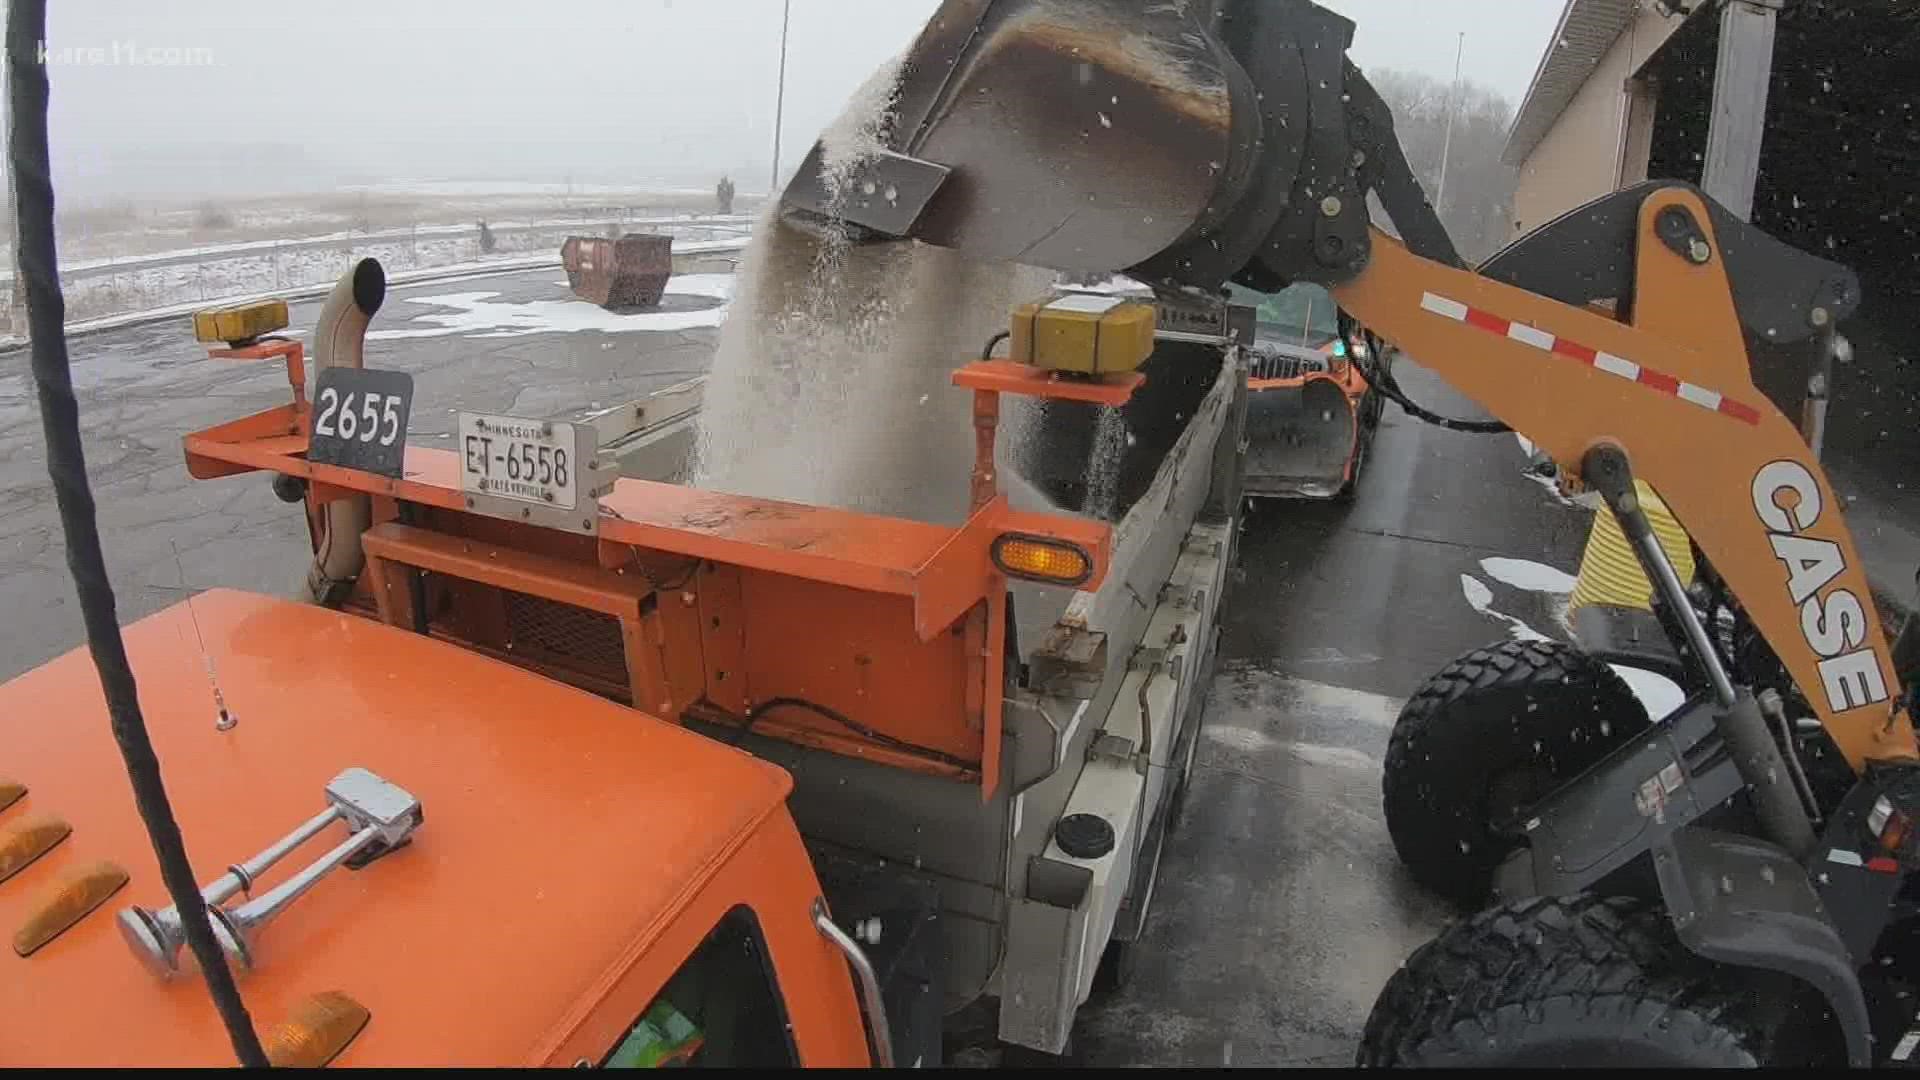 Despite shortages in other states, officials in the metro said they'll have plenty of crews, and salt, to tackle what's coming down the pike.